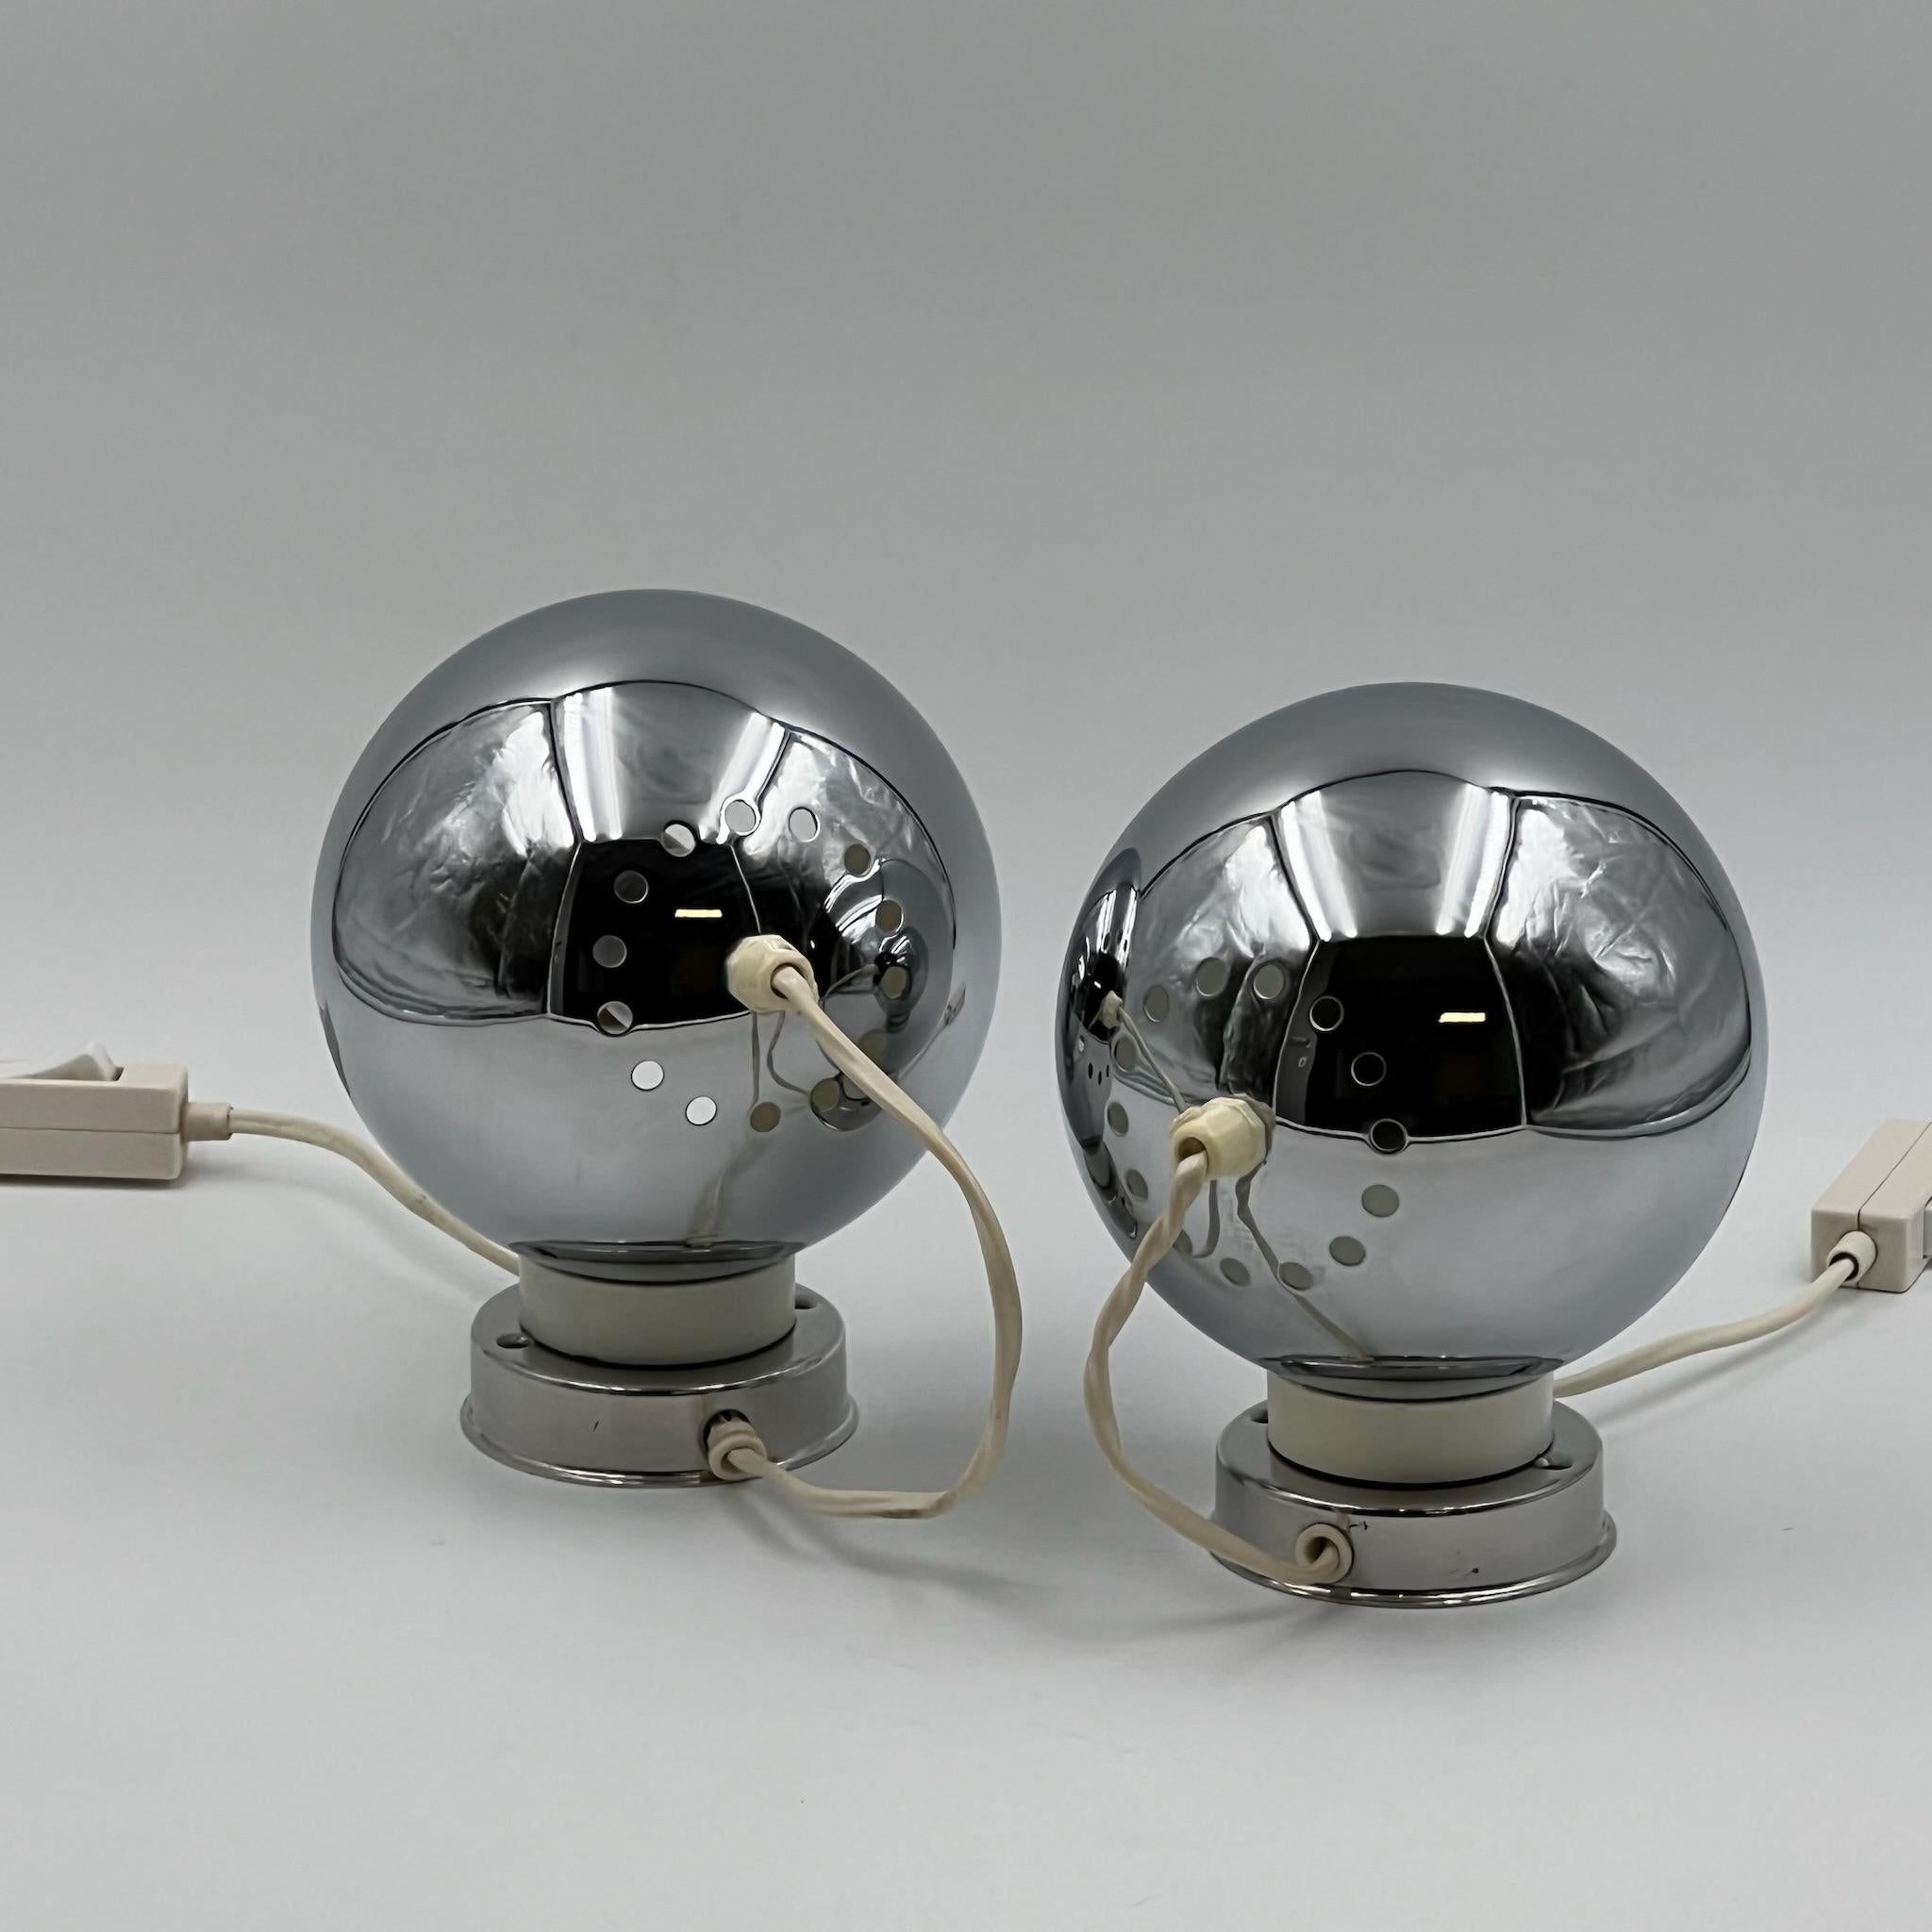 Iconic Reggiani 'Eyeball' Lamps 60s - Pair of Vintage Masterpieces - Set of 2 In Good Condition For Sale In San Benedetto Del Tronto, IT